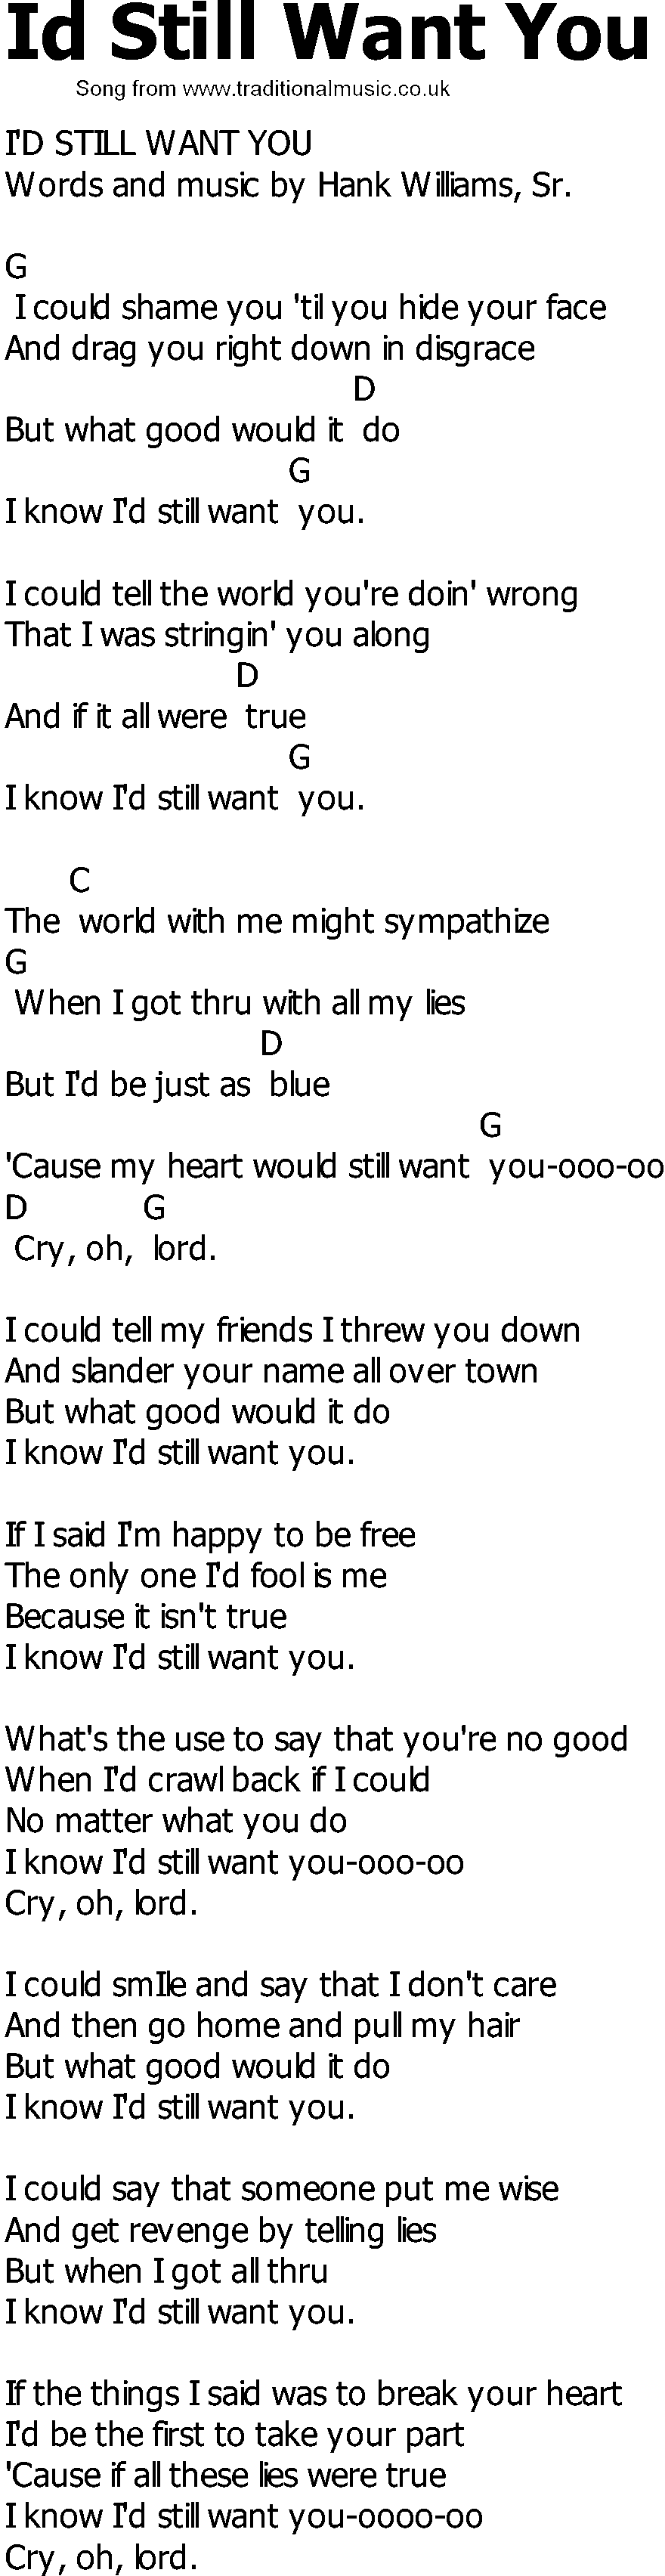 Old Country song lyrics with chords - Id Still Want You